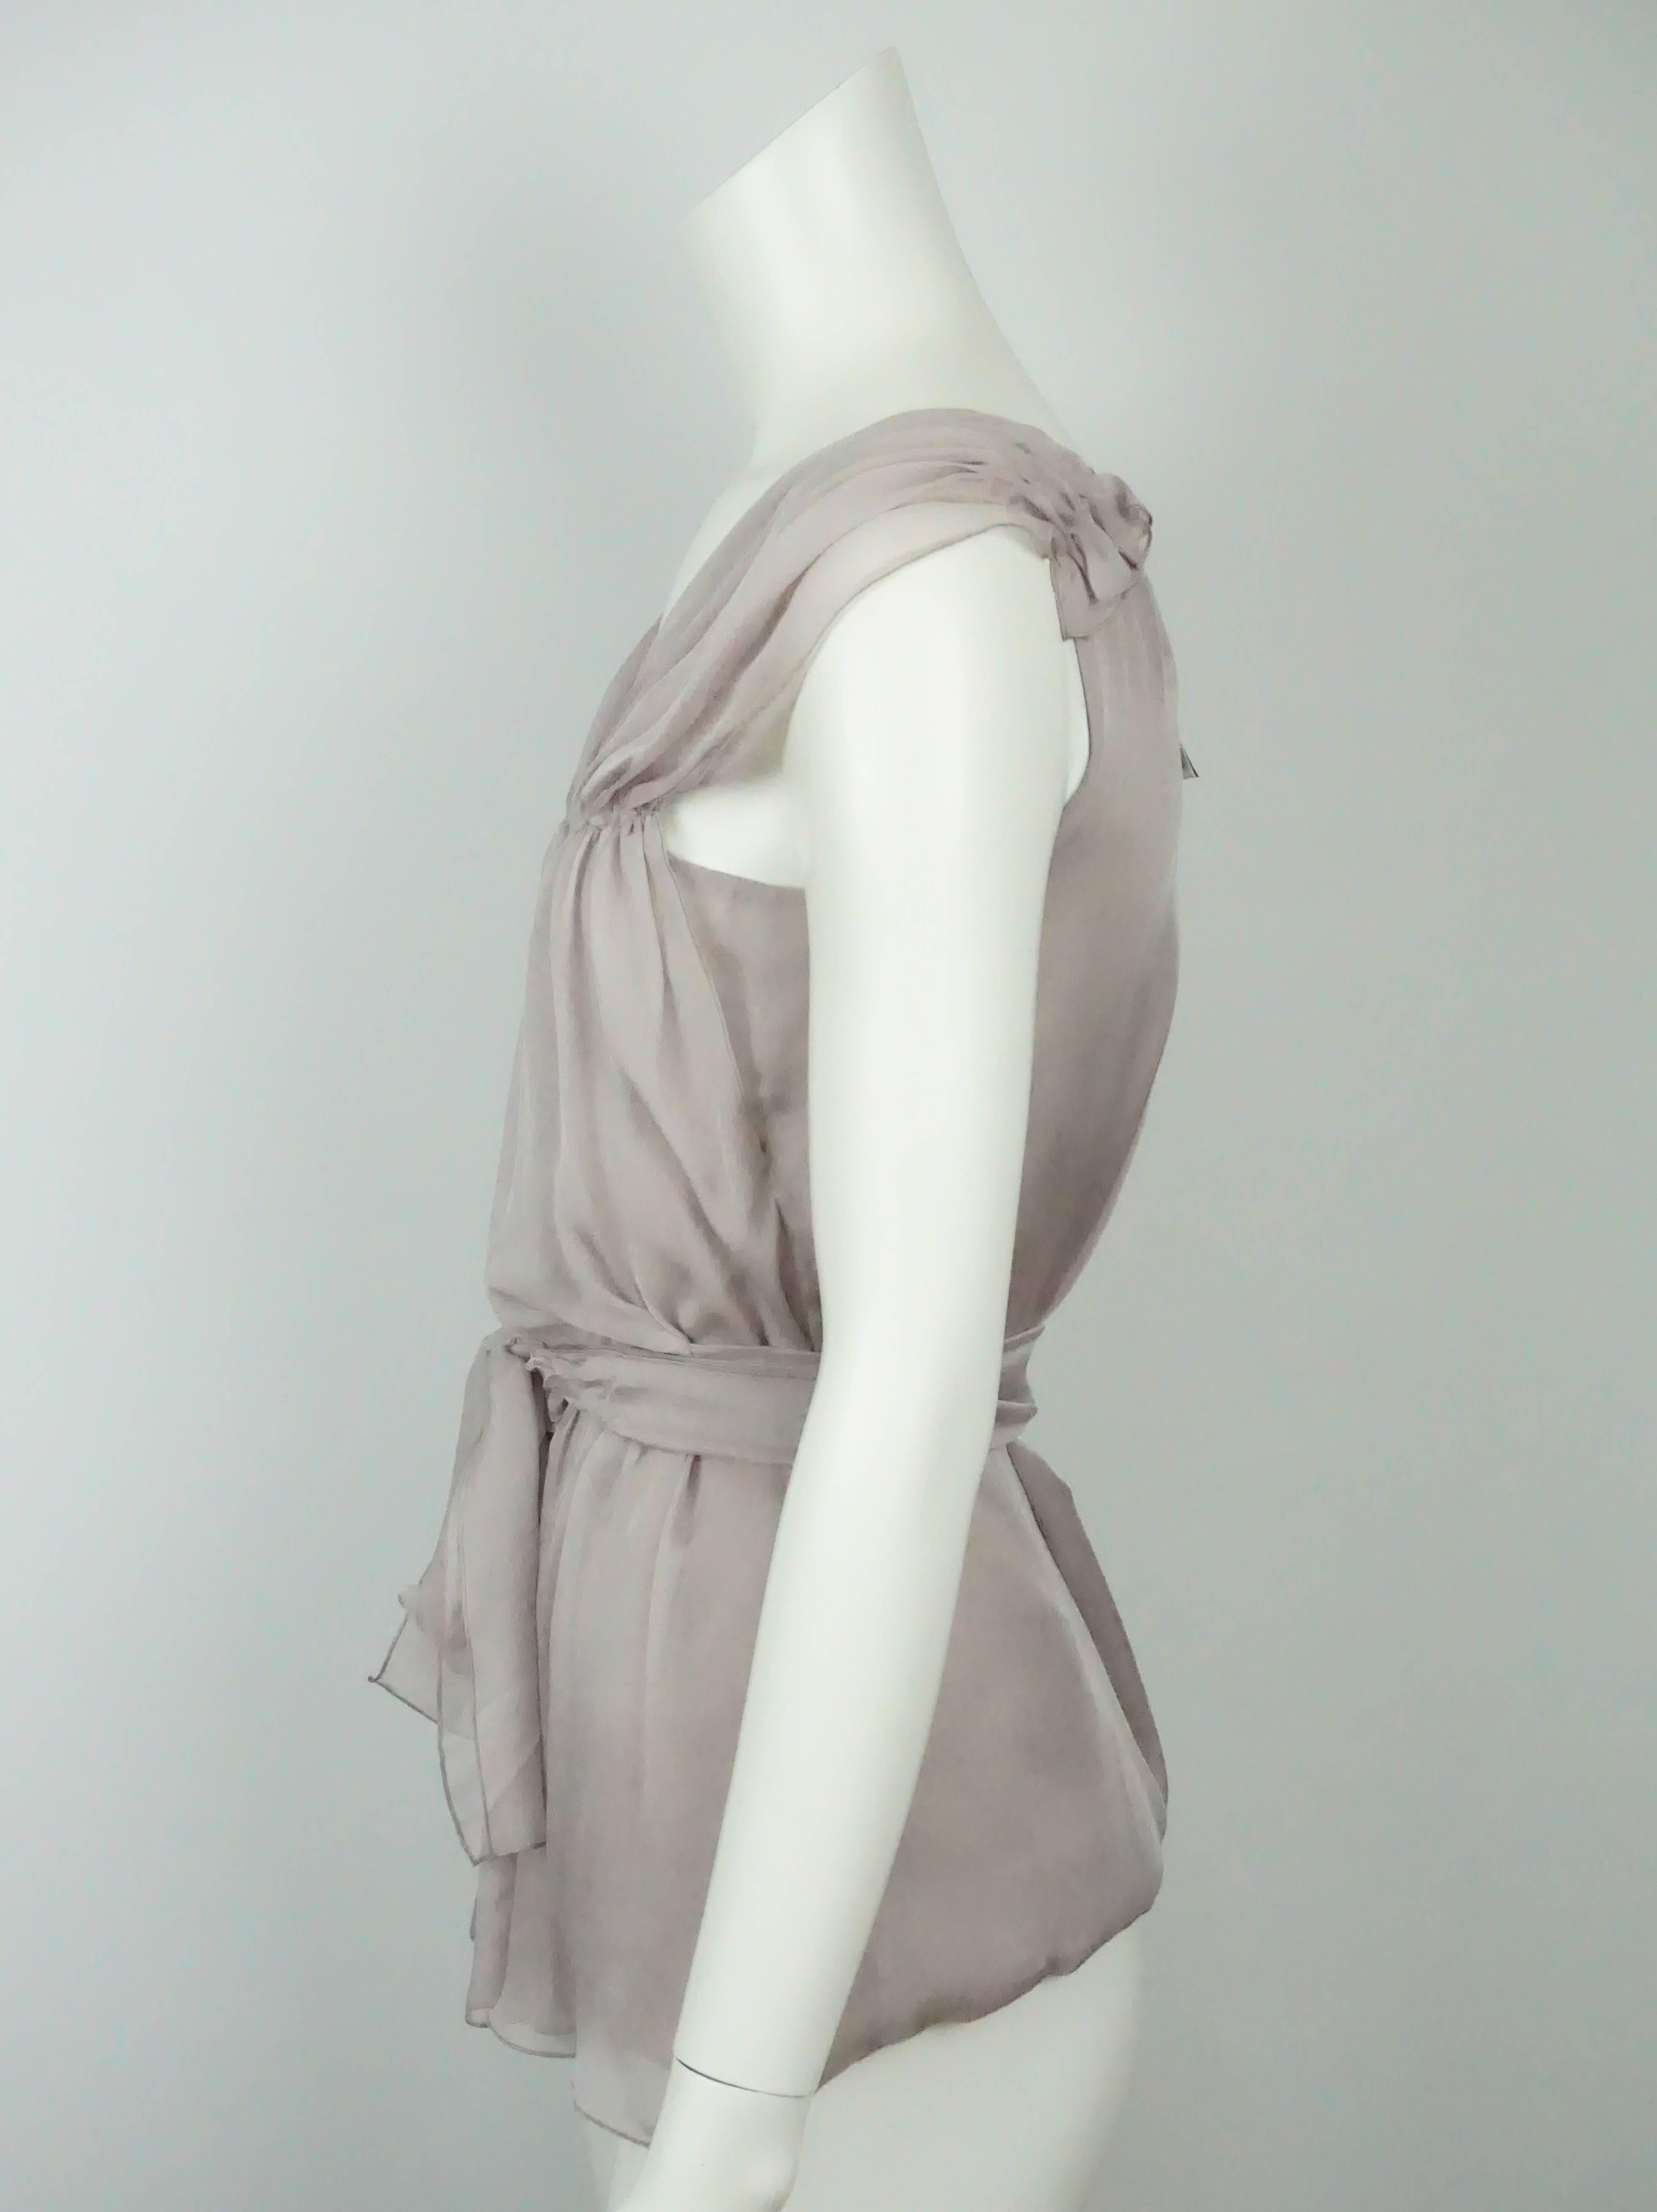 Alberta Feretti Mauve Sleeveless Chiffon Top - 2   This beautiful silk chiffon top is in excellent condition. The entire top has a drape effect to it and drapes in three layers. In the front of the near the waist there is extra fabric that wraps